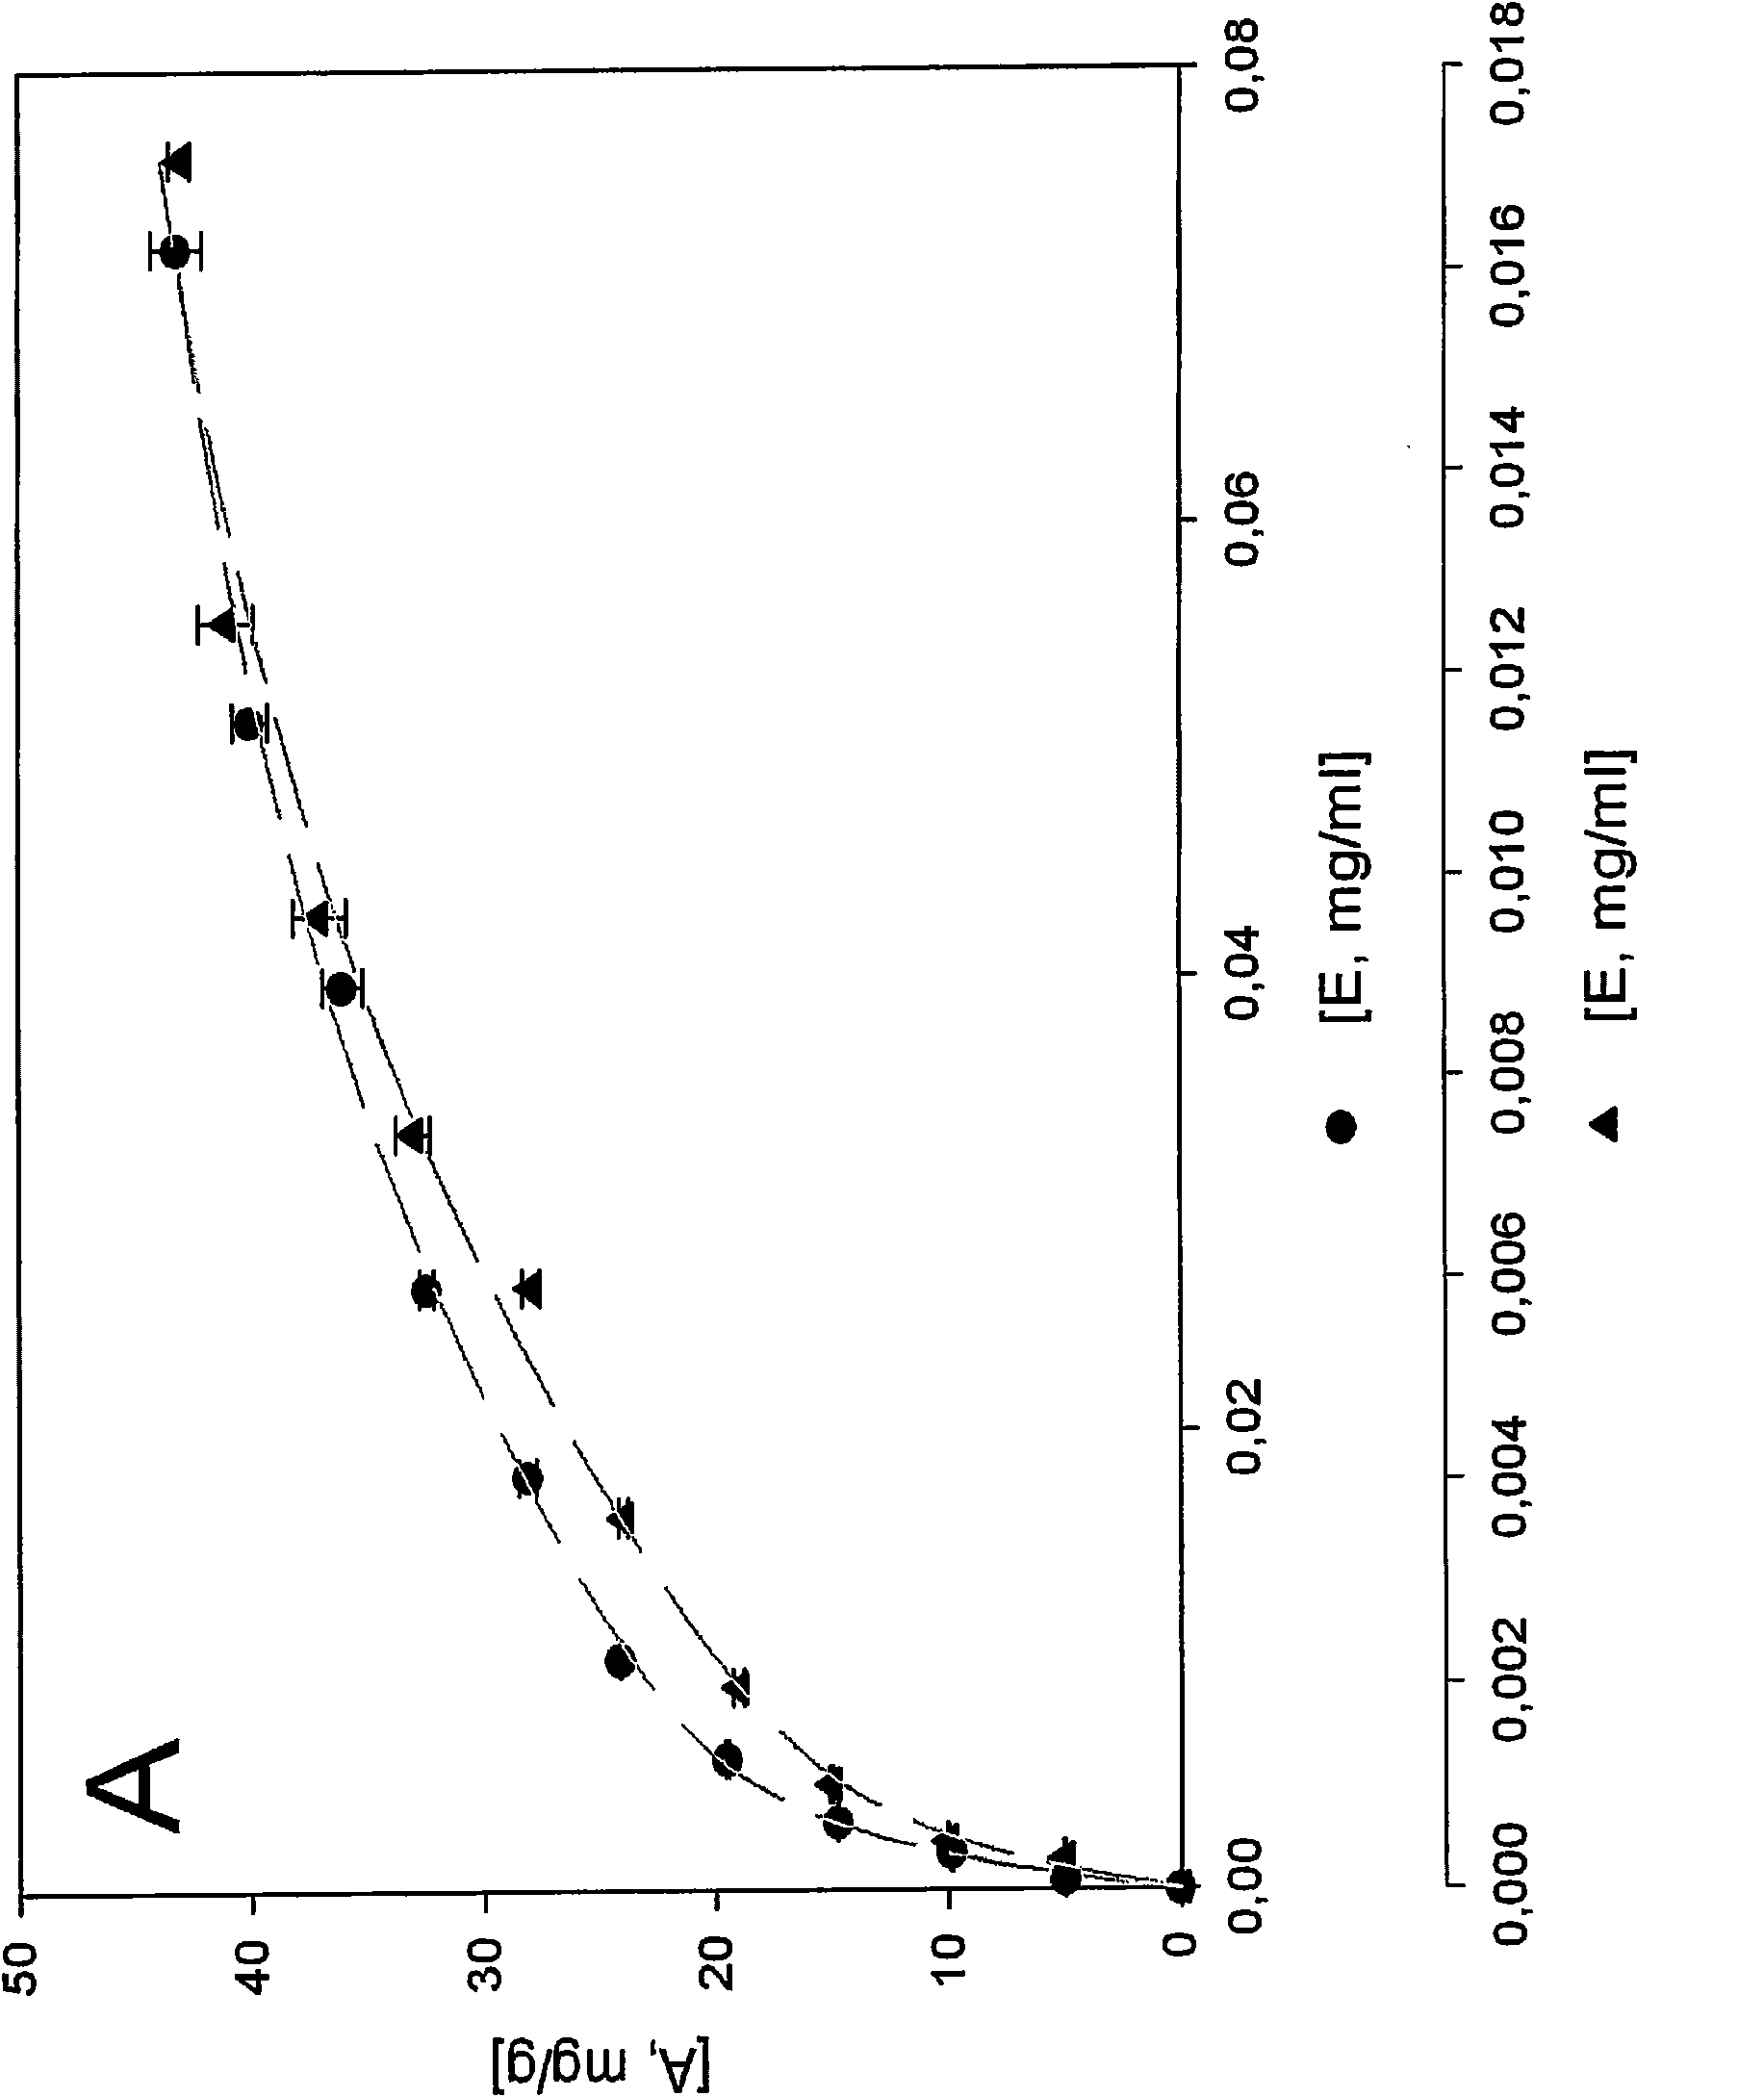 Implantable material for medical or surgical application